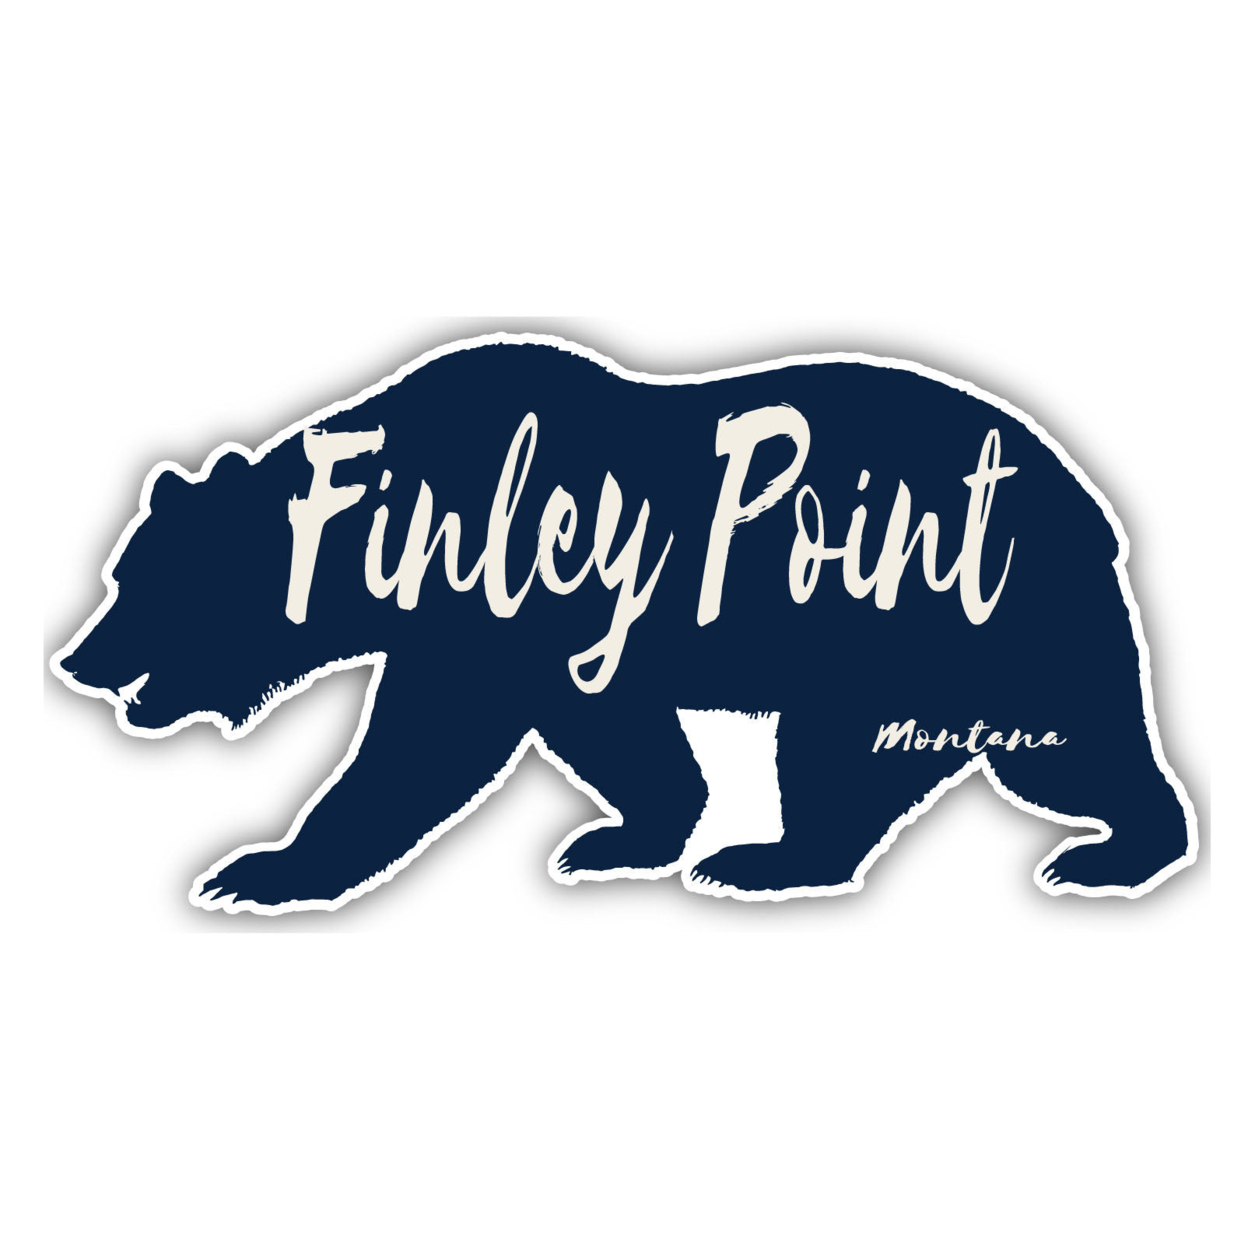 Finley Point Montana Souvenir Decorative Stickers (Choose Theme And Size) - 4-Pack, 8-Inch, Bear